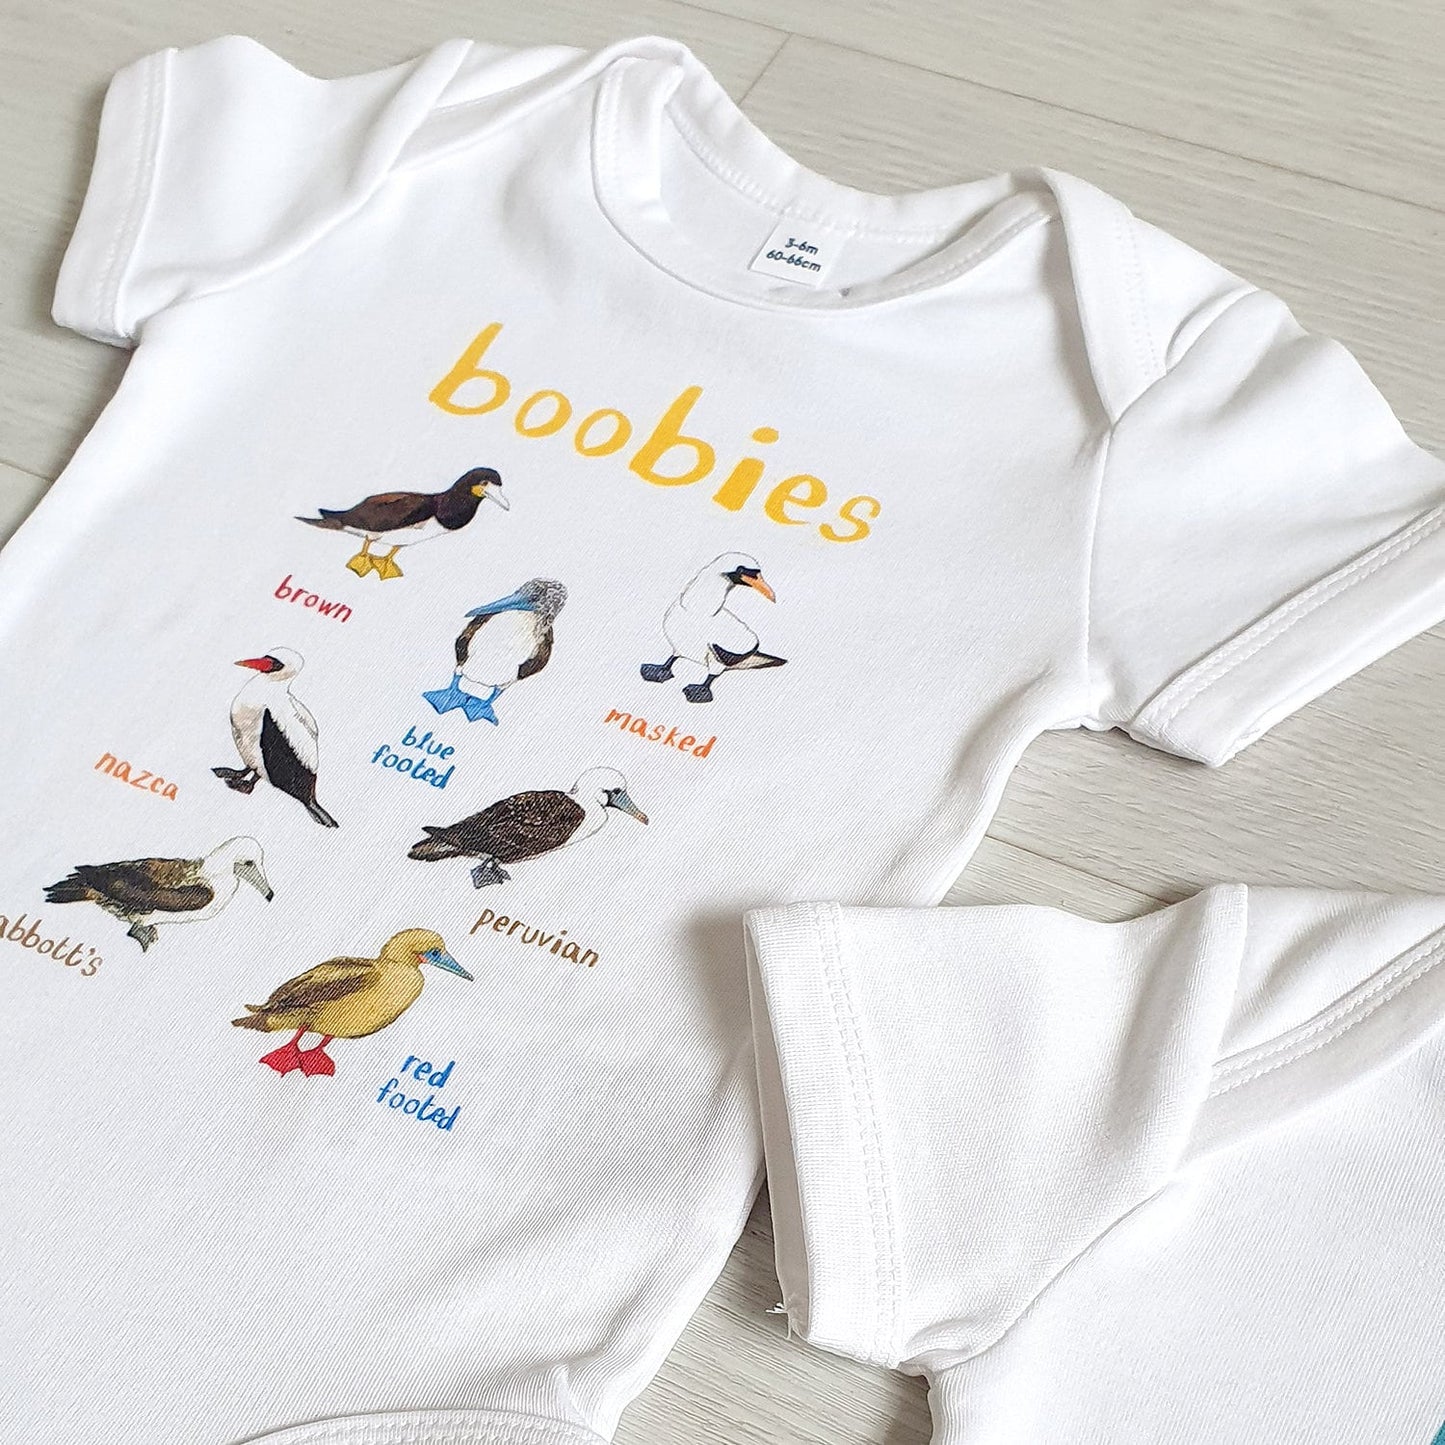 Pair of Tits and Boobies Baby Vests